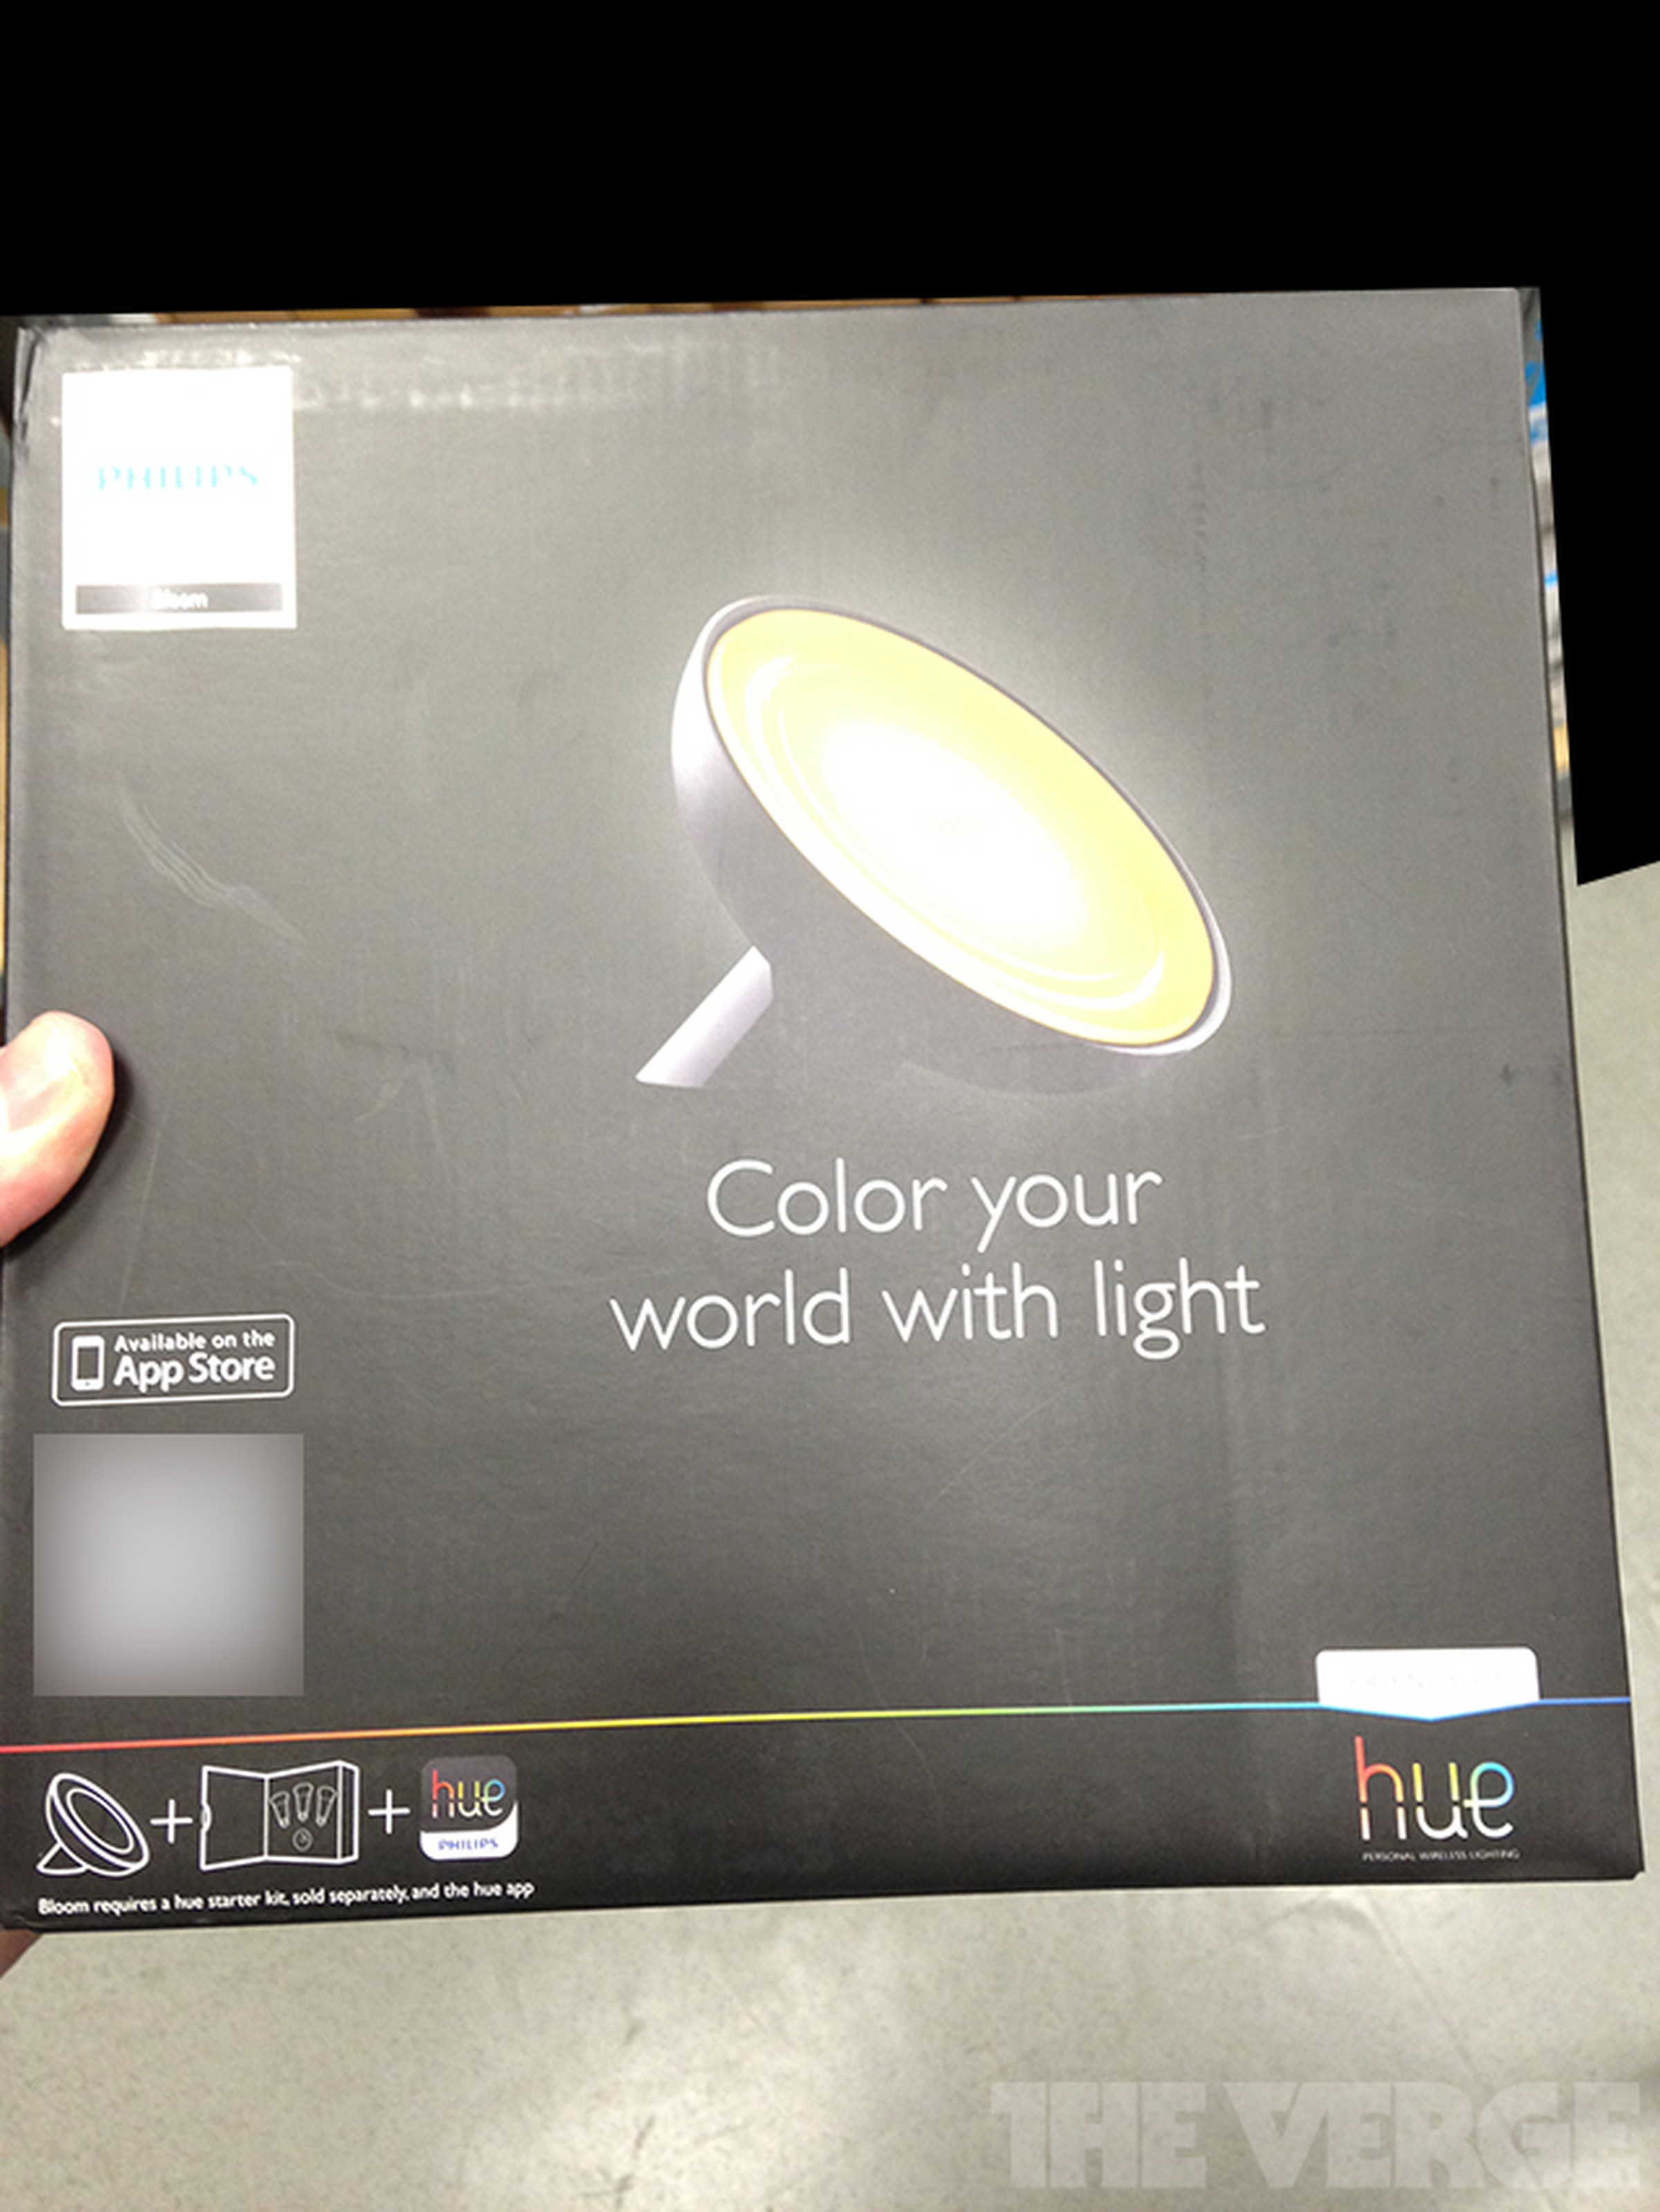 Philips Hue LightStrips and Bloom photos